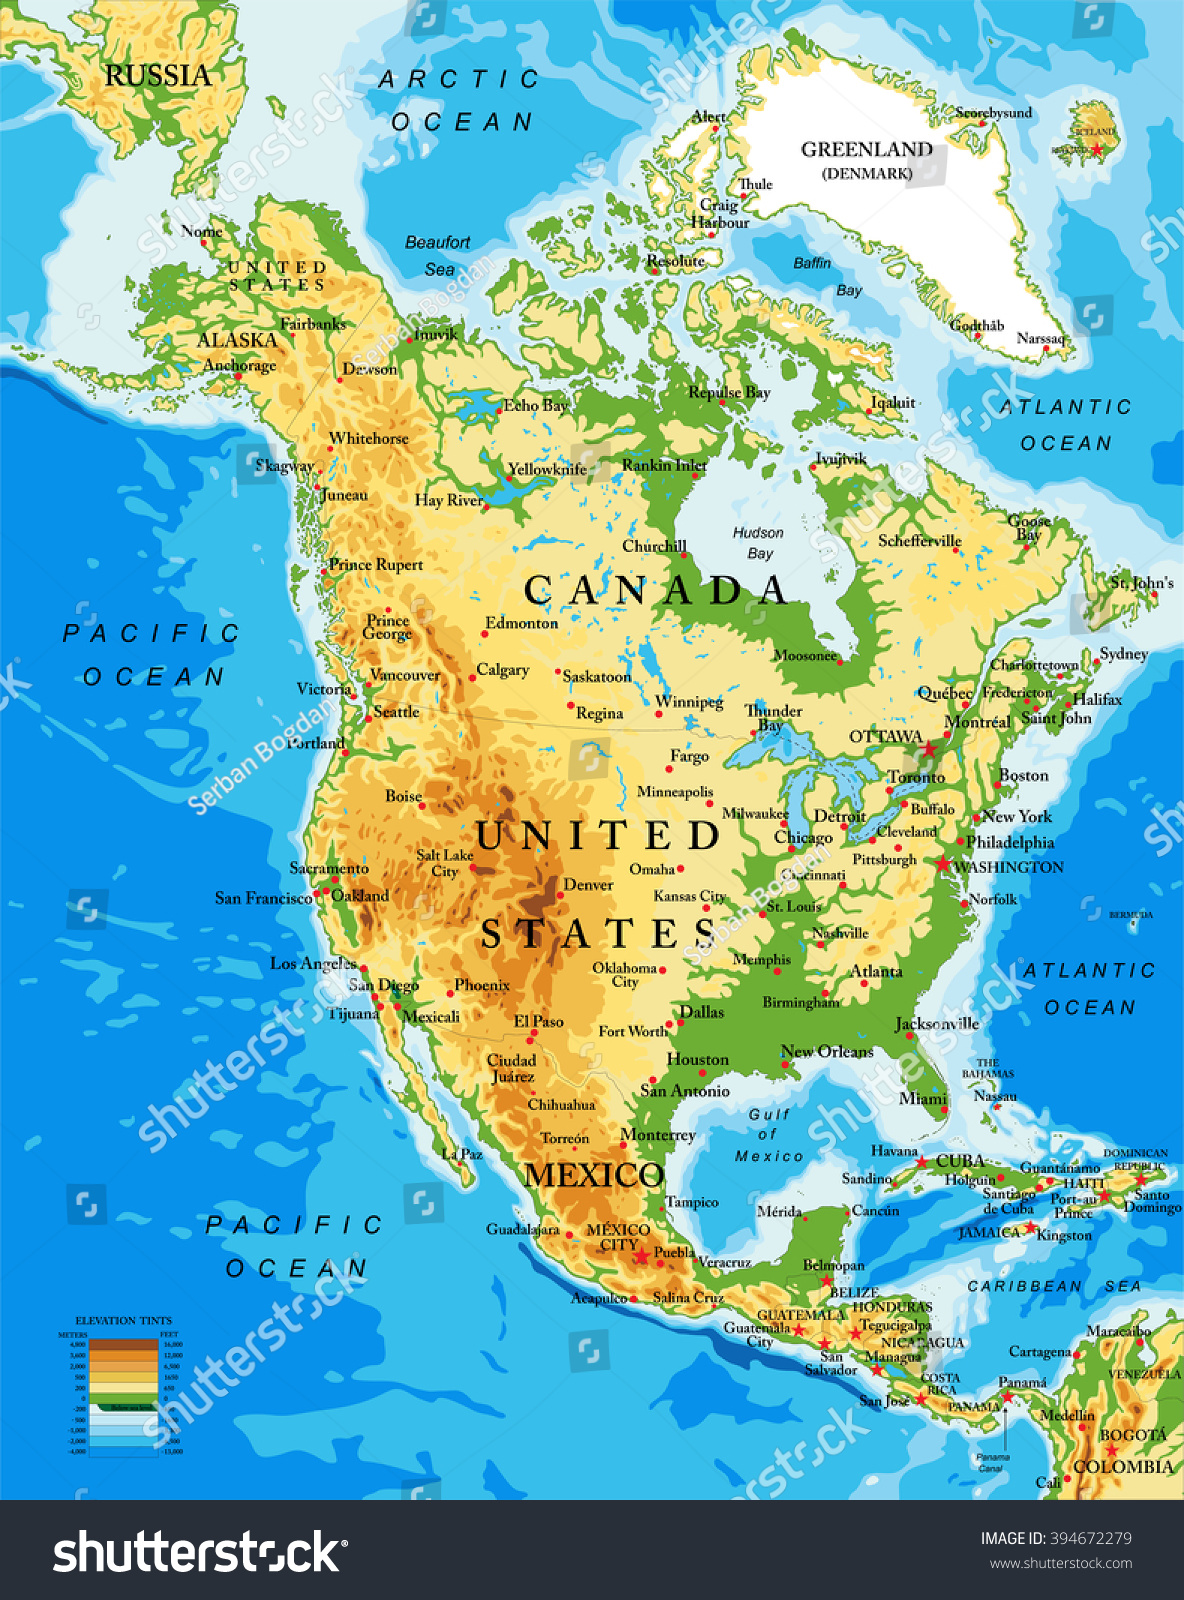 Physical Map Of North America Royalty Free Stock Vector 394672279 0686